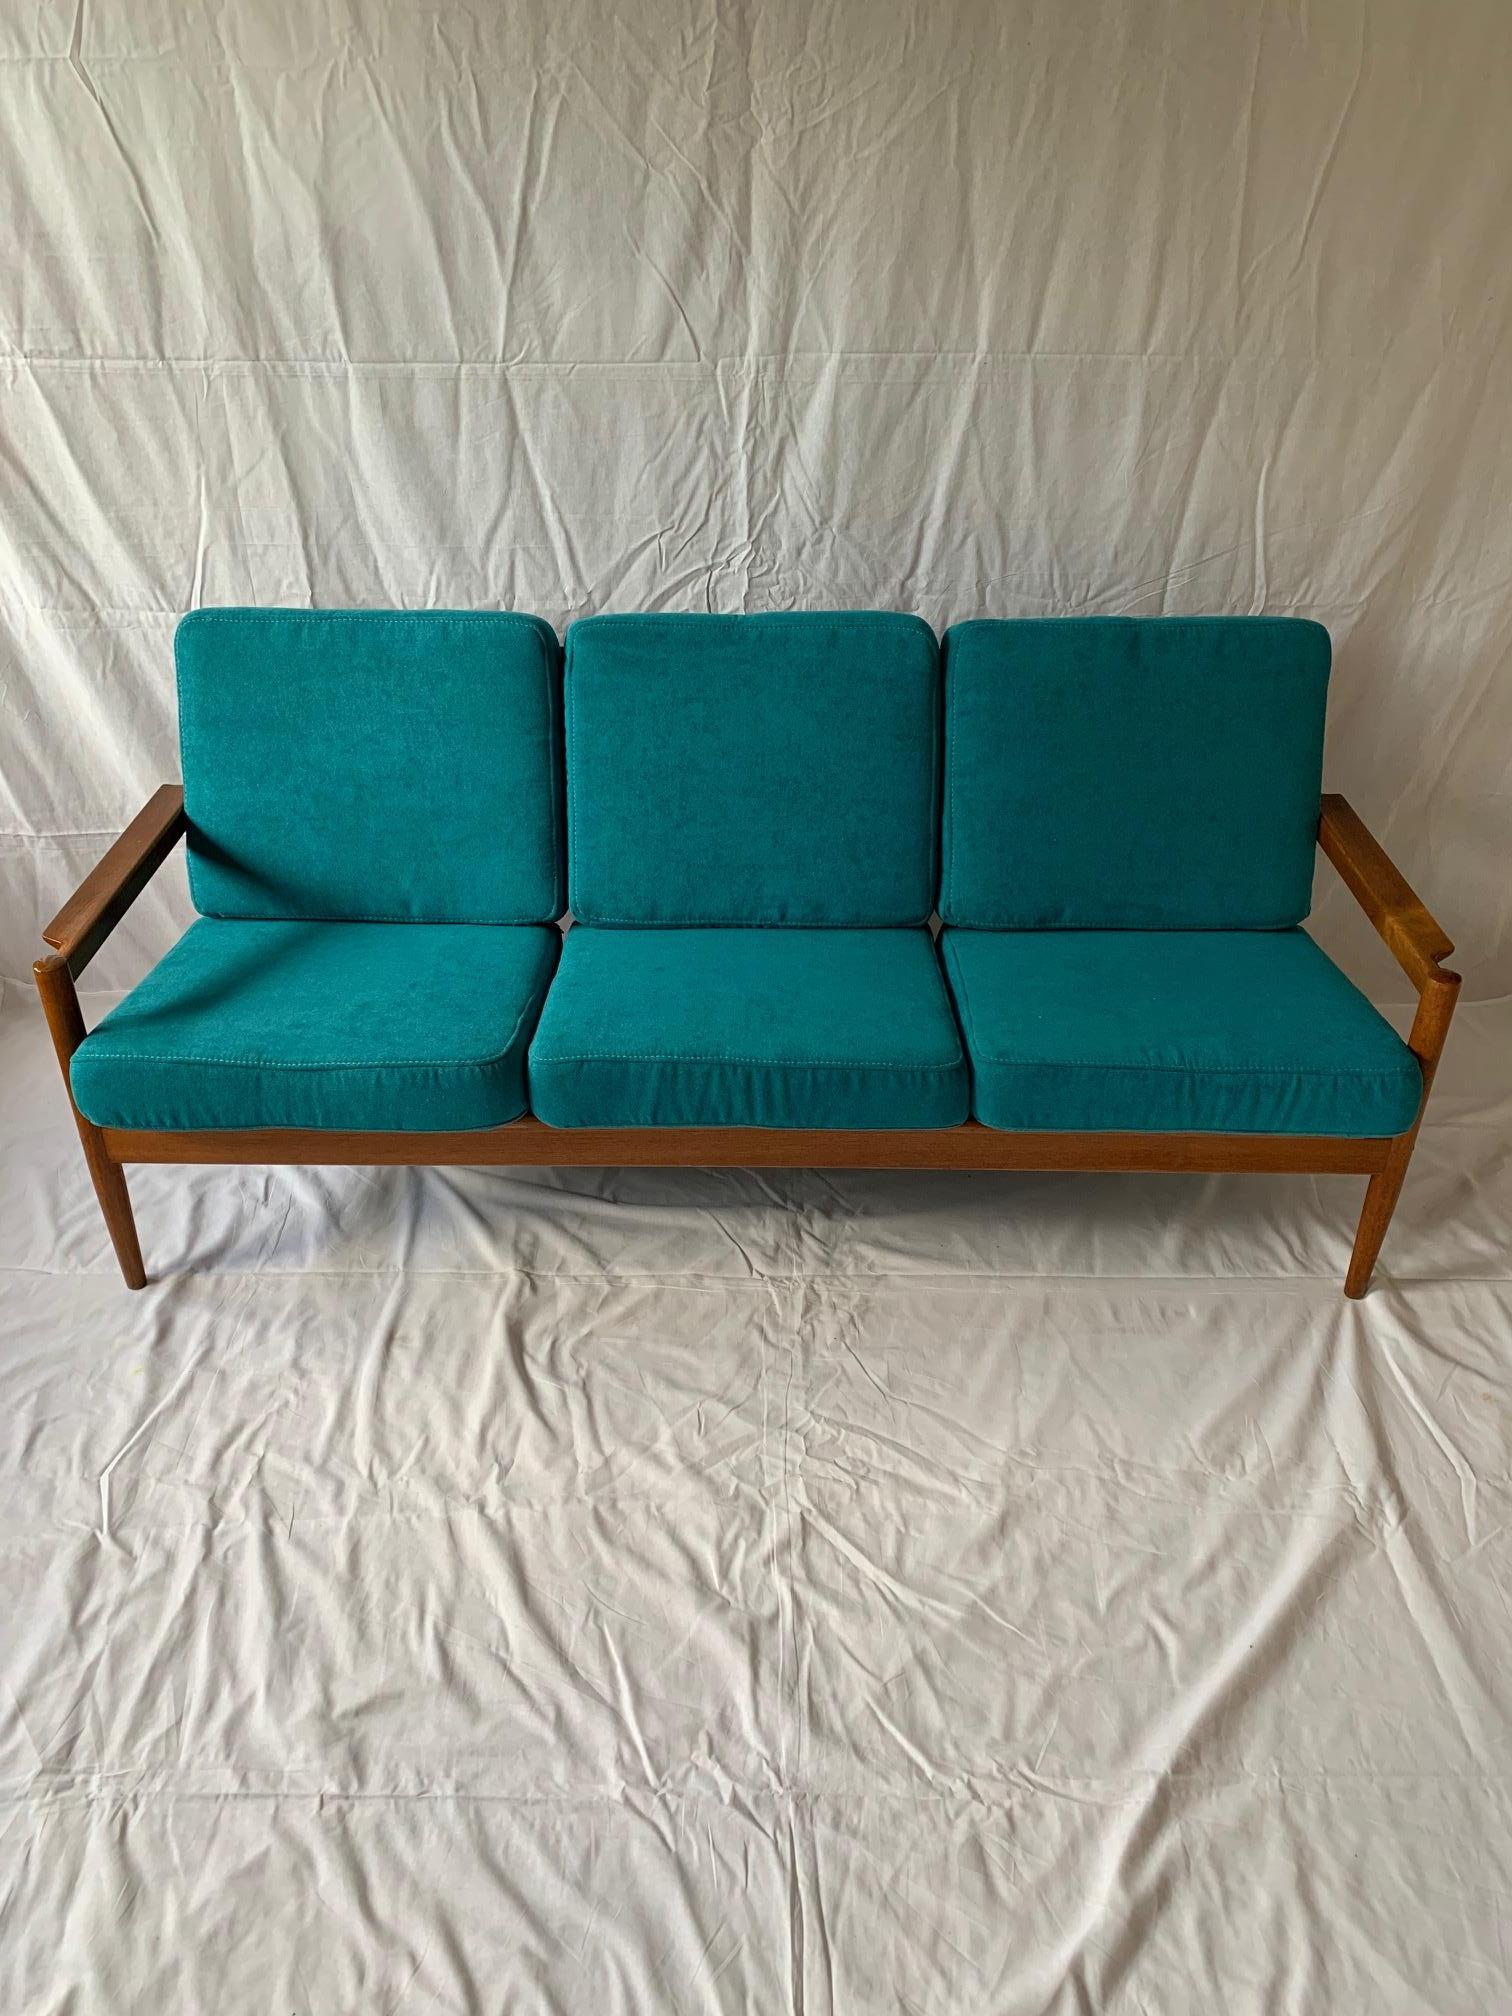 Danish sofa designed by Børge Jensen & Sønner for Bernstorffsminde Møbelfabrik. Fully original, signed with new upholstery. A high-class material with an age-appropriate texture was used. A timeless, Classic Danish form. Perfect workmanship.